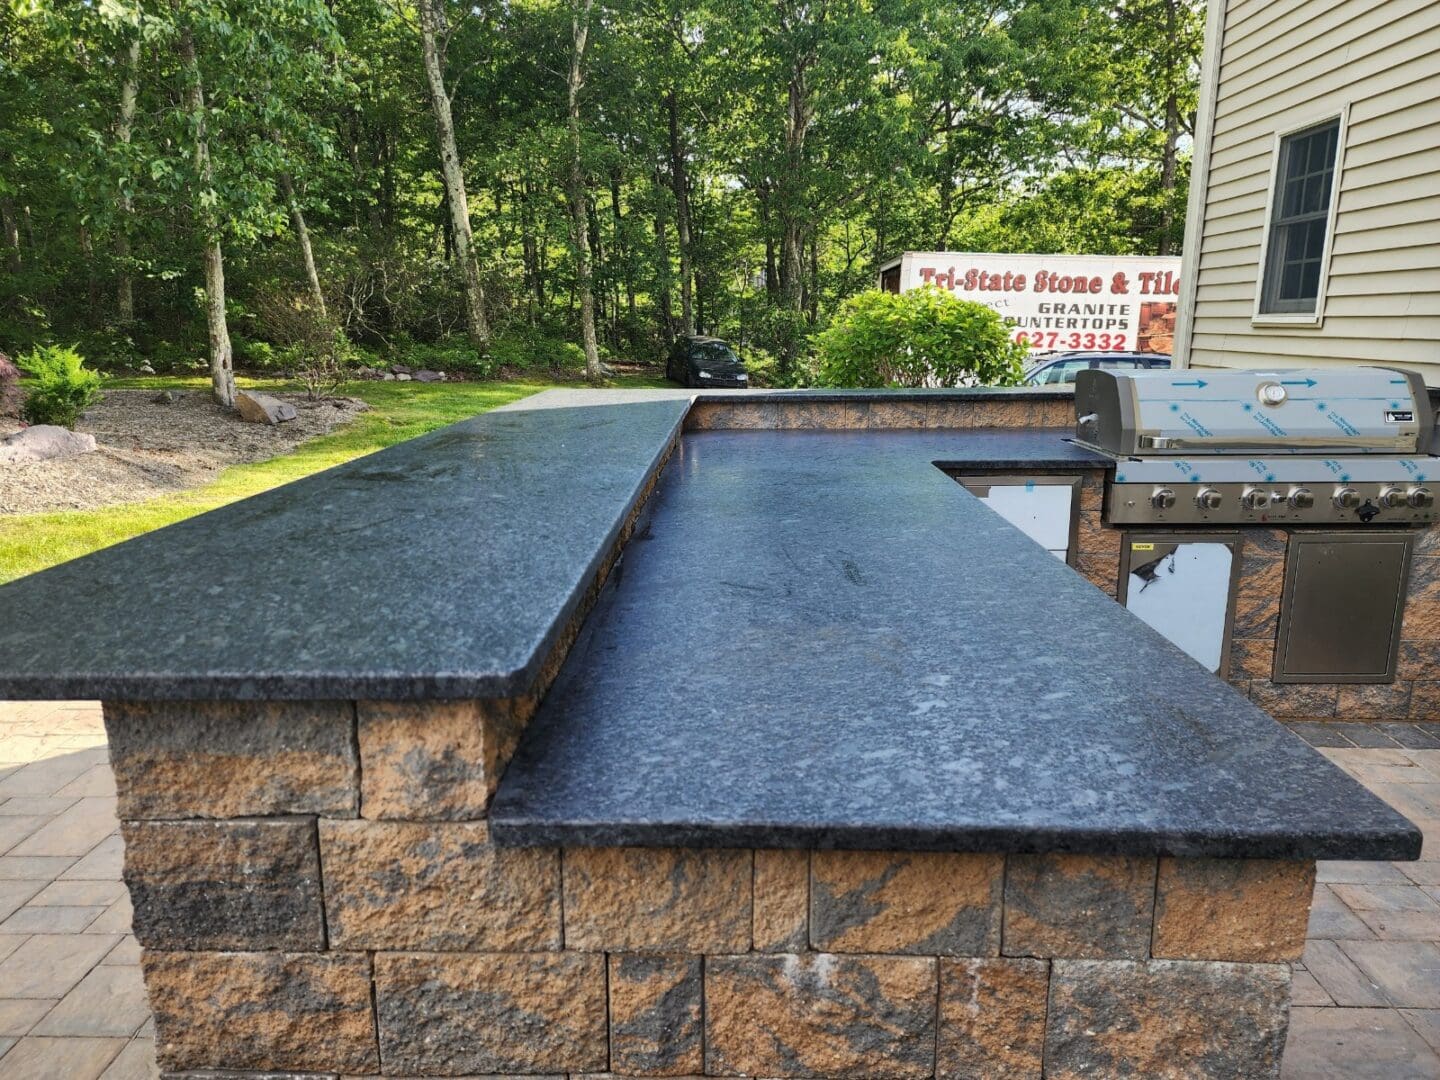 A black granite counter top on the side of a building.